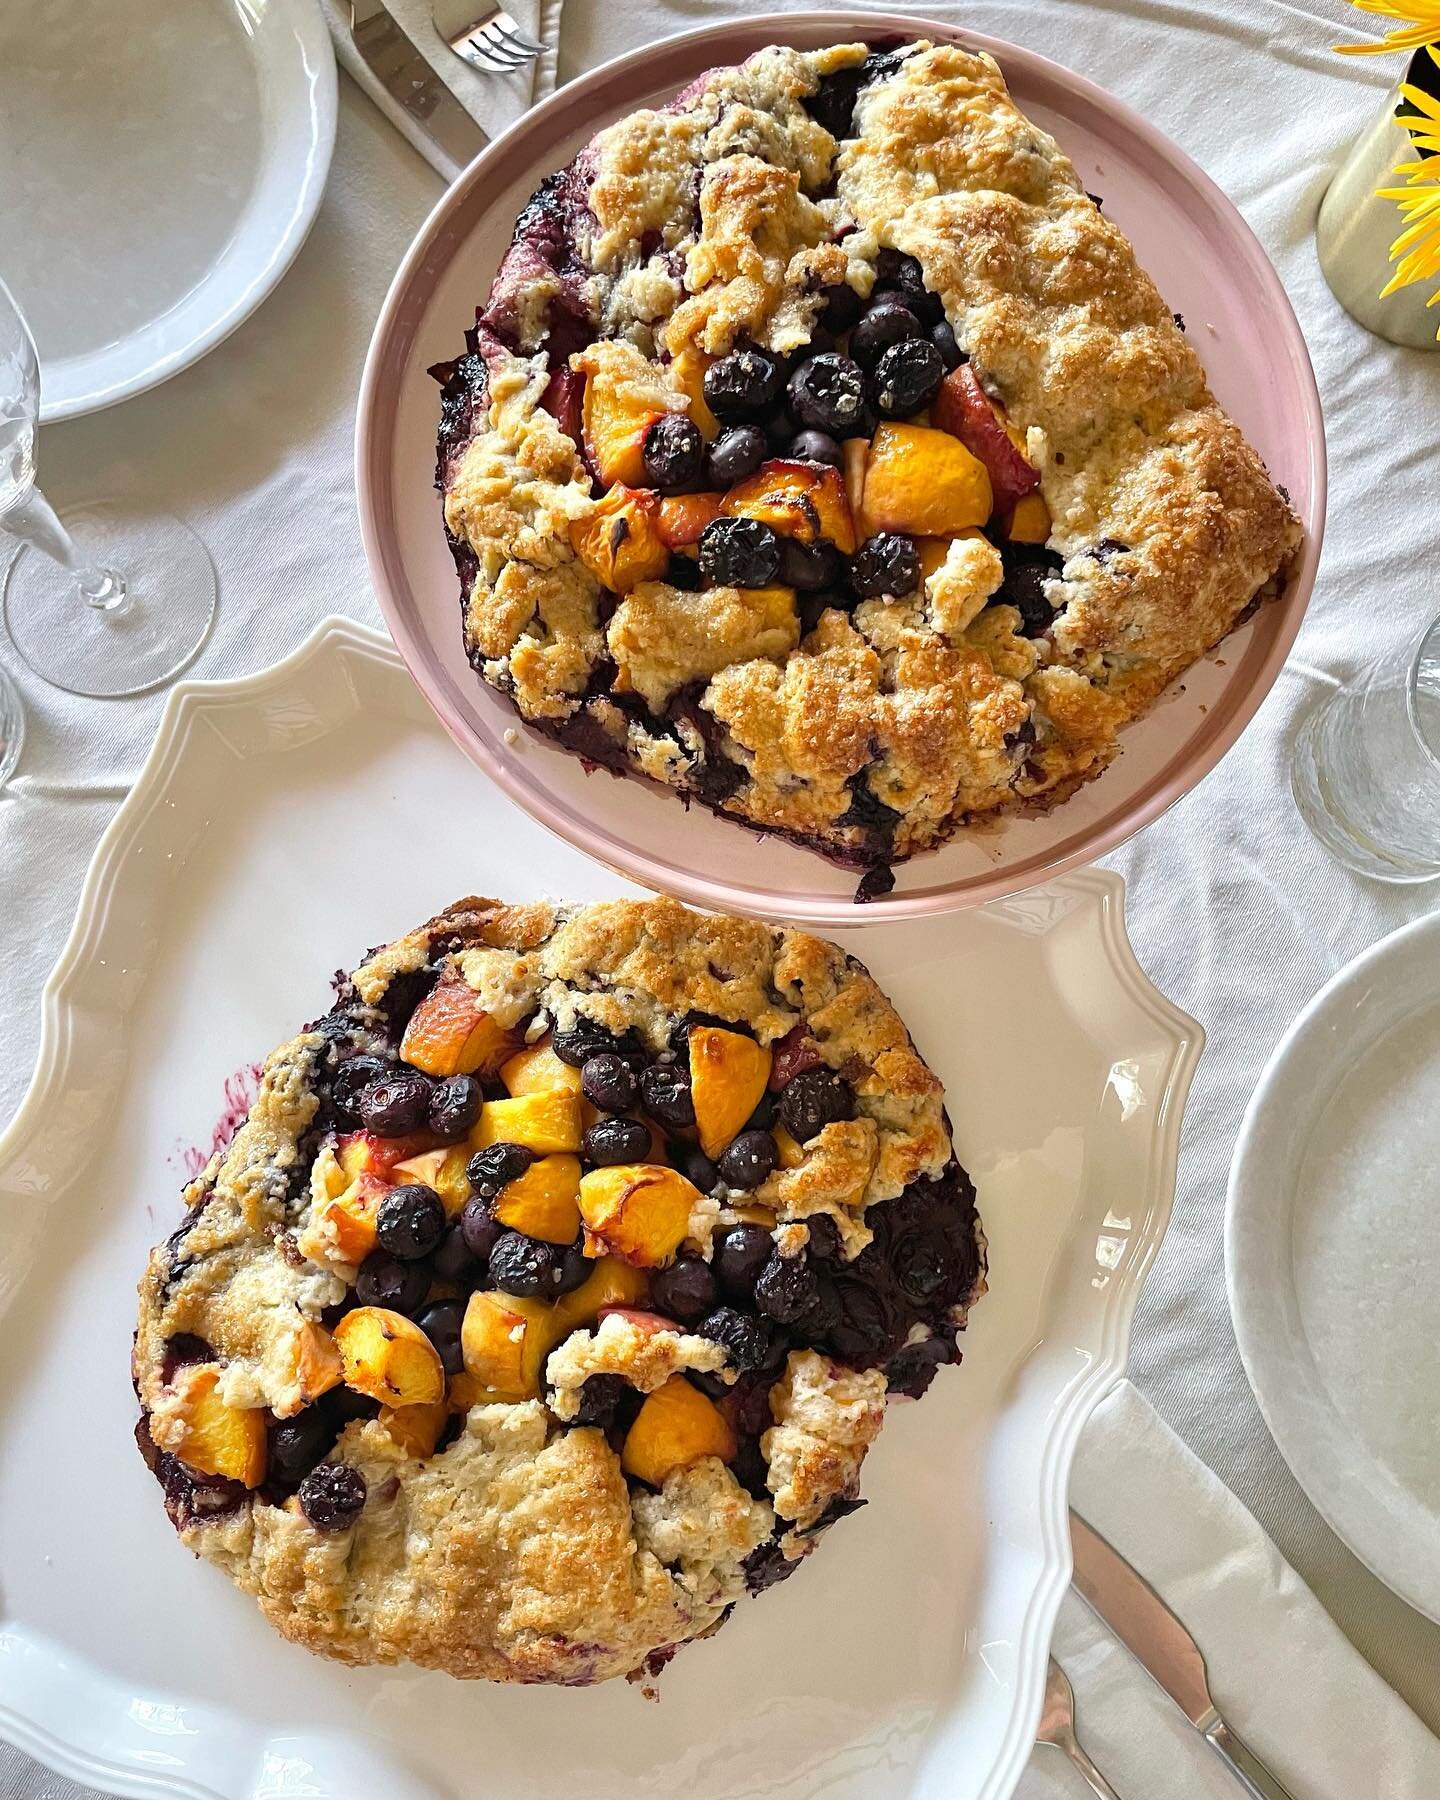 Finishing up last of the season&rsquo;s peaches 🍑 &amp; blueberries 🫐Galette&hellip; or rustic pie. Yummy!!